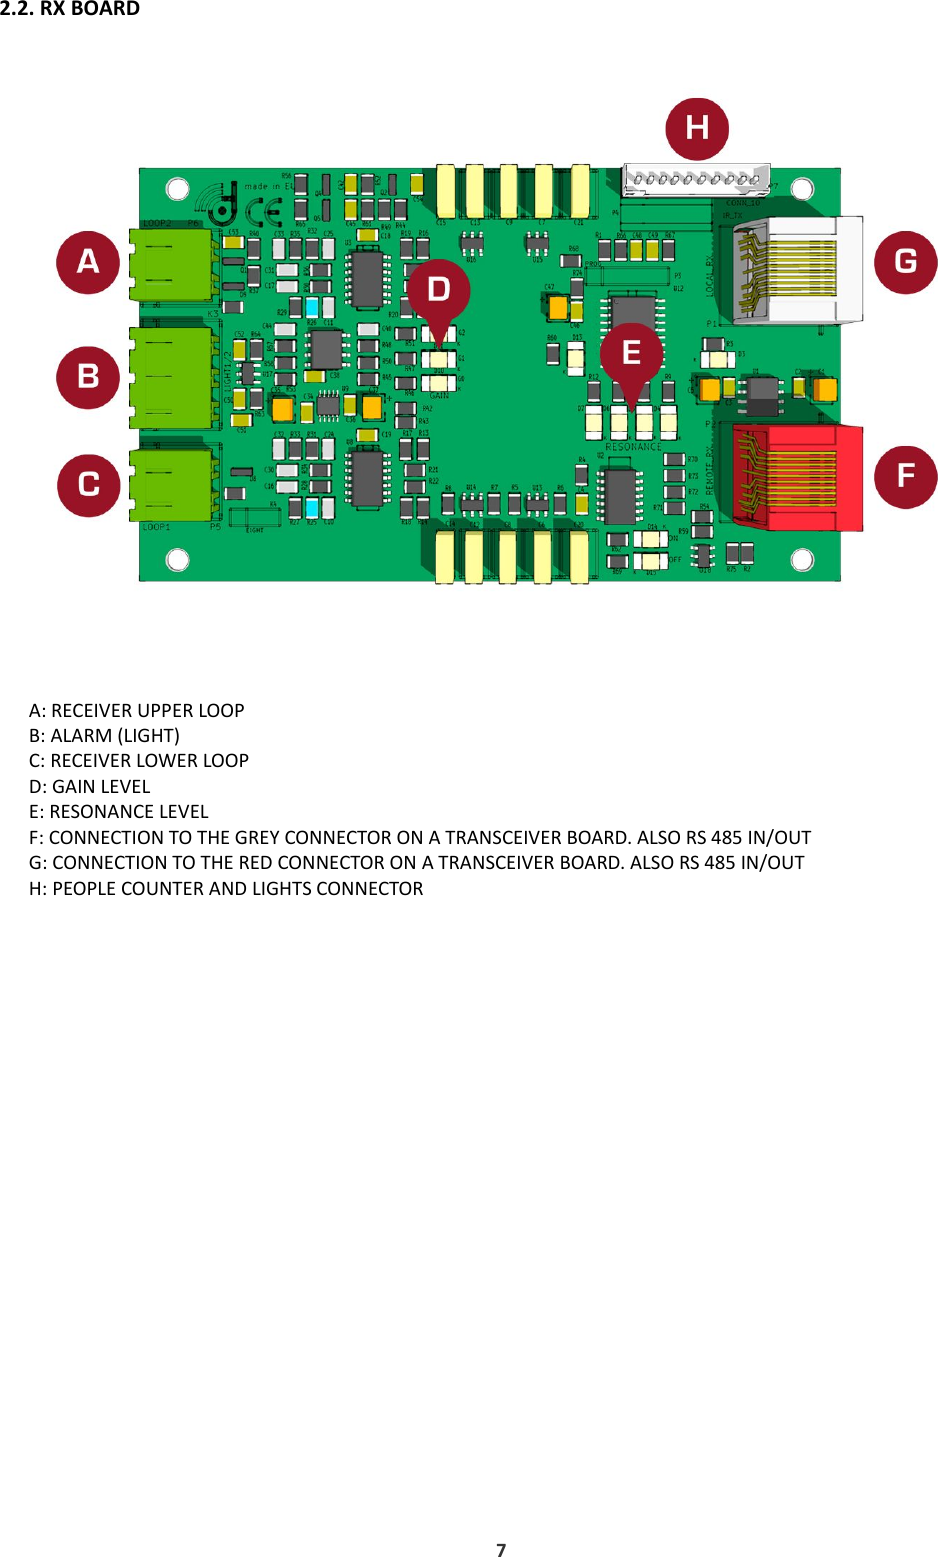 2.2. RX BOARDA: RECEIVER UPPER LOOPB: ALARM (LIGHT)C: RECEIVER LOWER LOOPD: GAIN LEVELE: RESONANCE LEVELF: CONNECTION TO THE GREY CONNECTOR ON A TRANSCEIVER BOARD. ALSO RS 485 IN/OUTG: CONNECTION TO THE RED CONNECTOR ON A TRANSCEIVER BOARD. ALSO RS 485 IN/OUTH: PEOPLE COUNTER AND LIGHTS CONNECTOR7